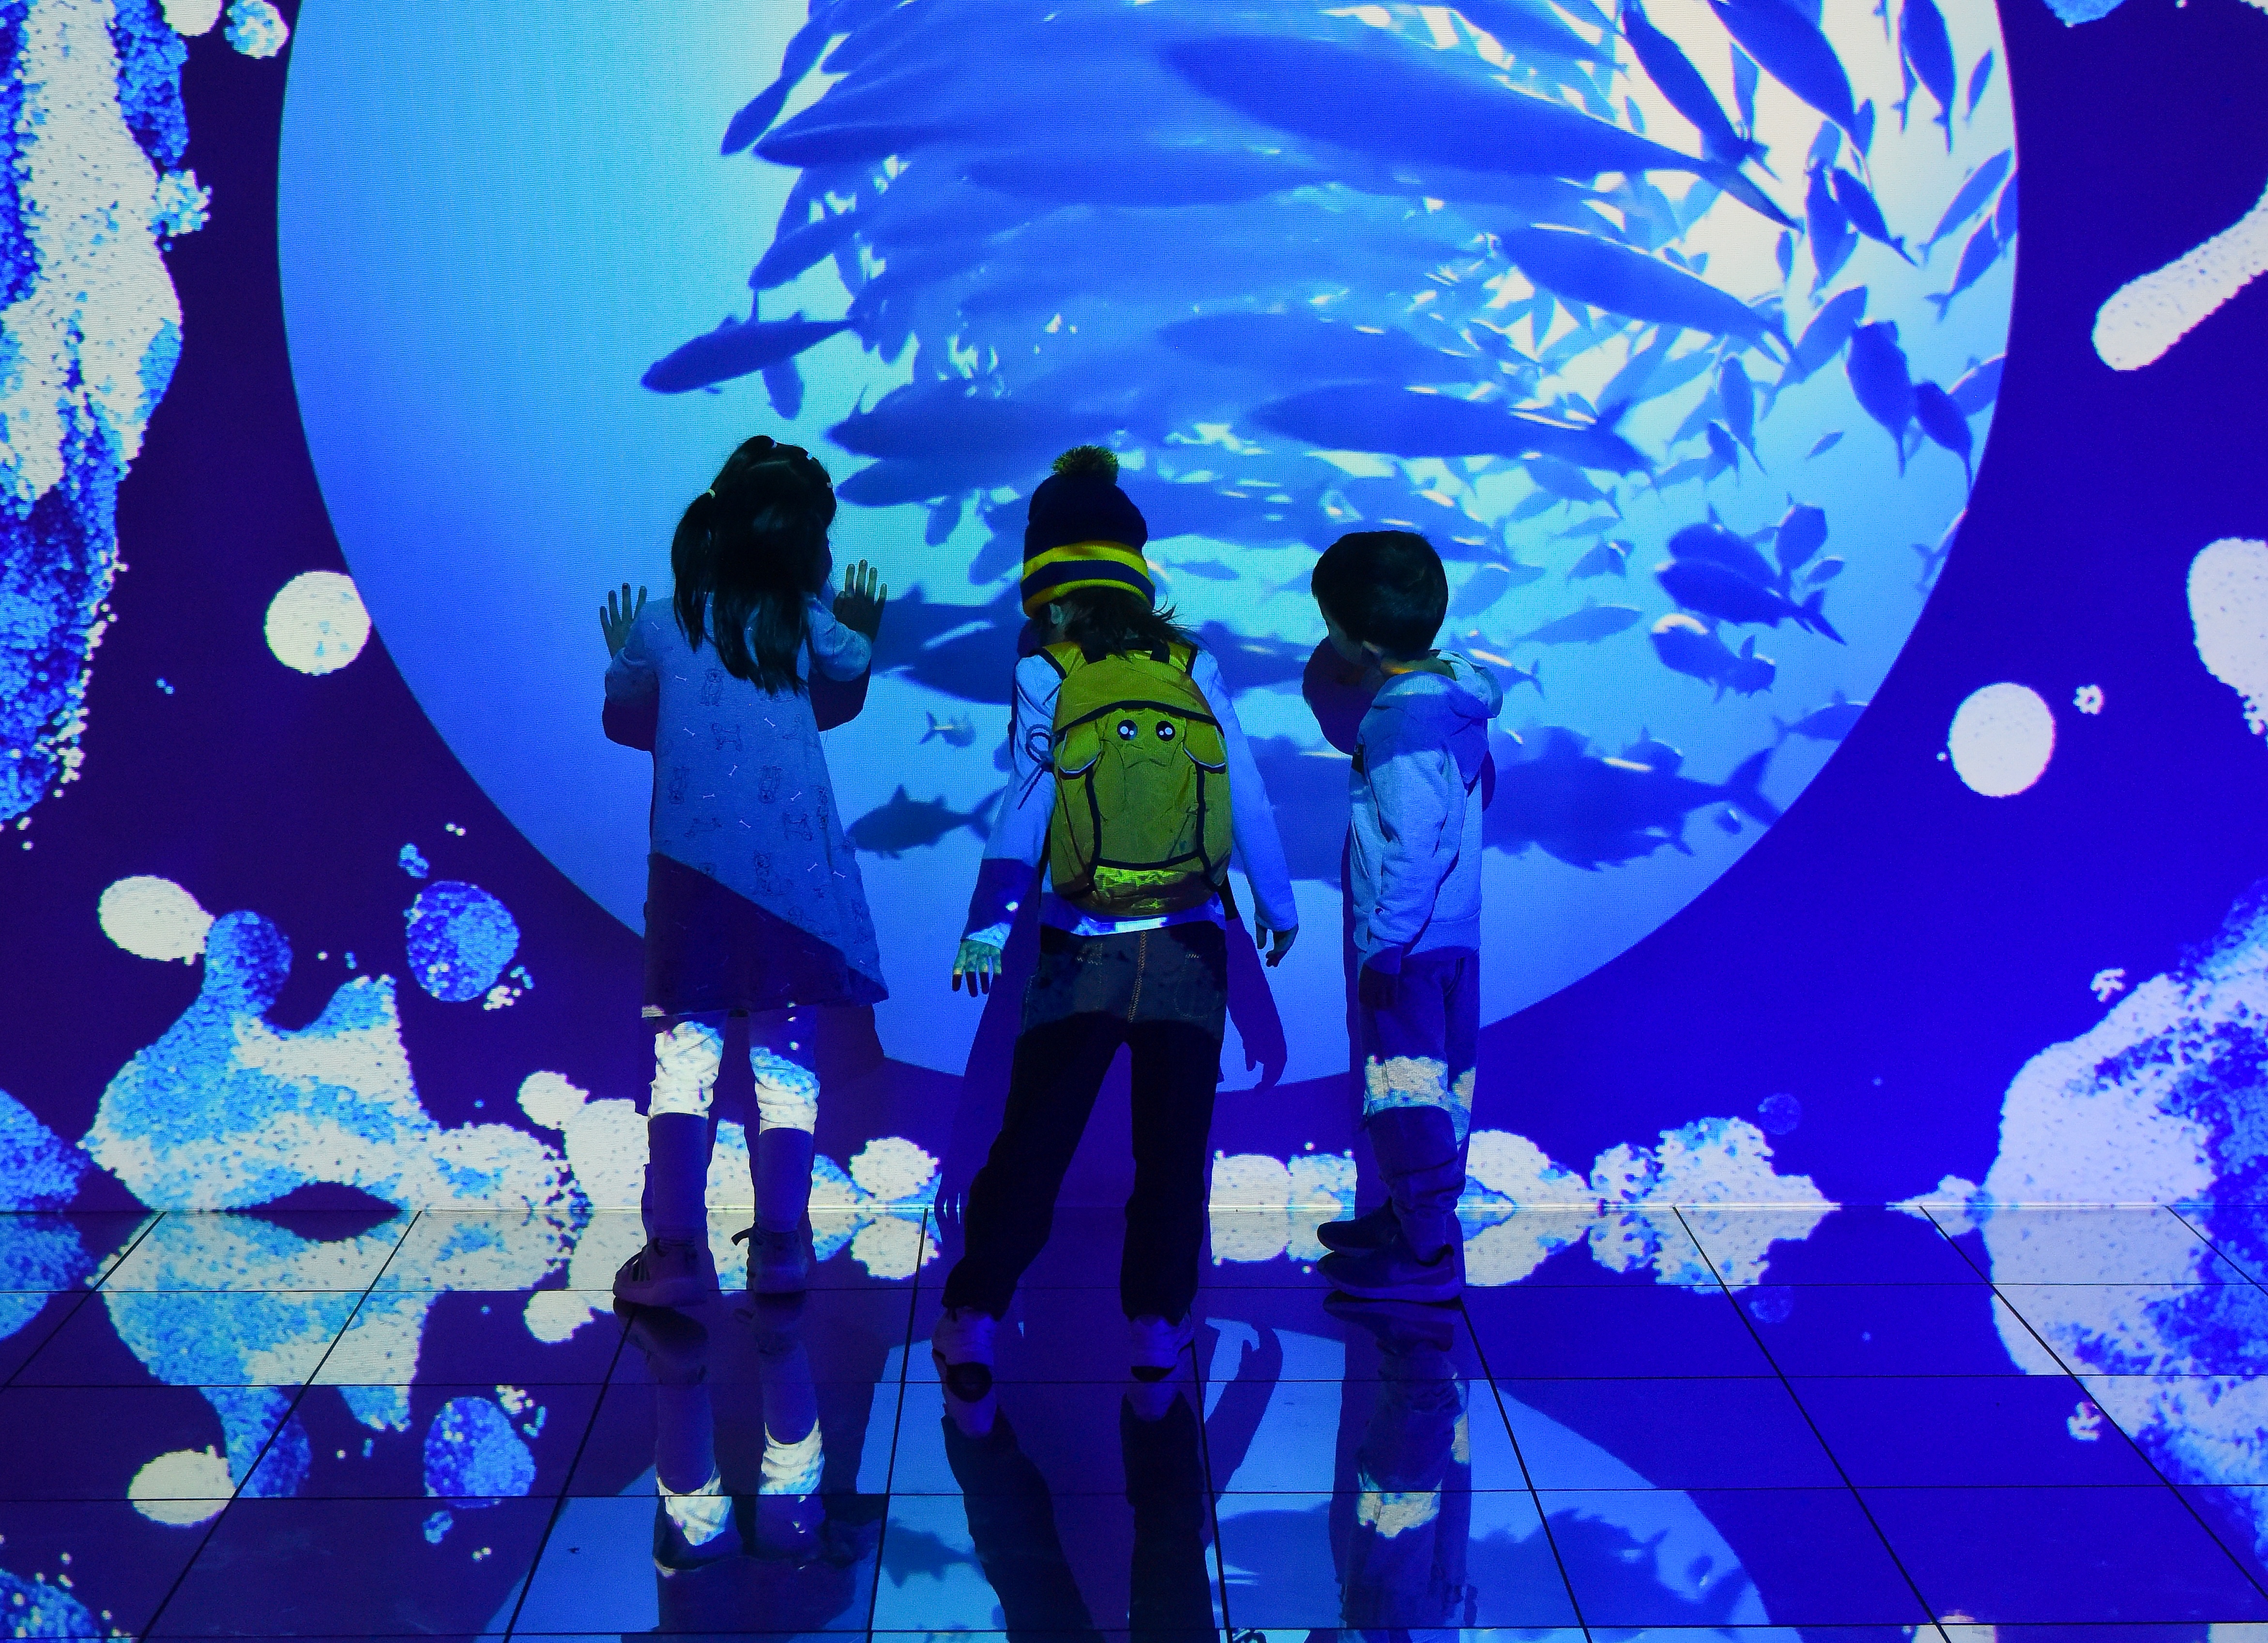 Three children stand on a reflective floor in a multi-media gallery, with blue underwater scenes projected onto a wall.